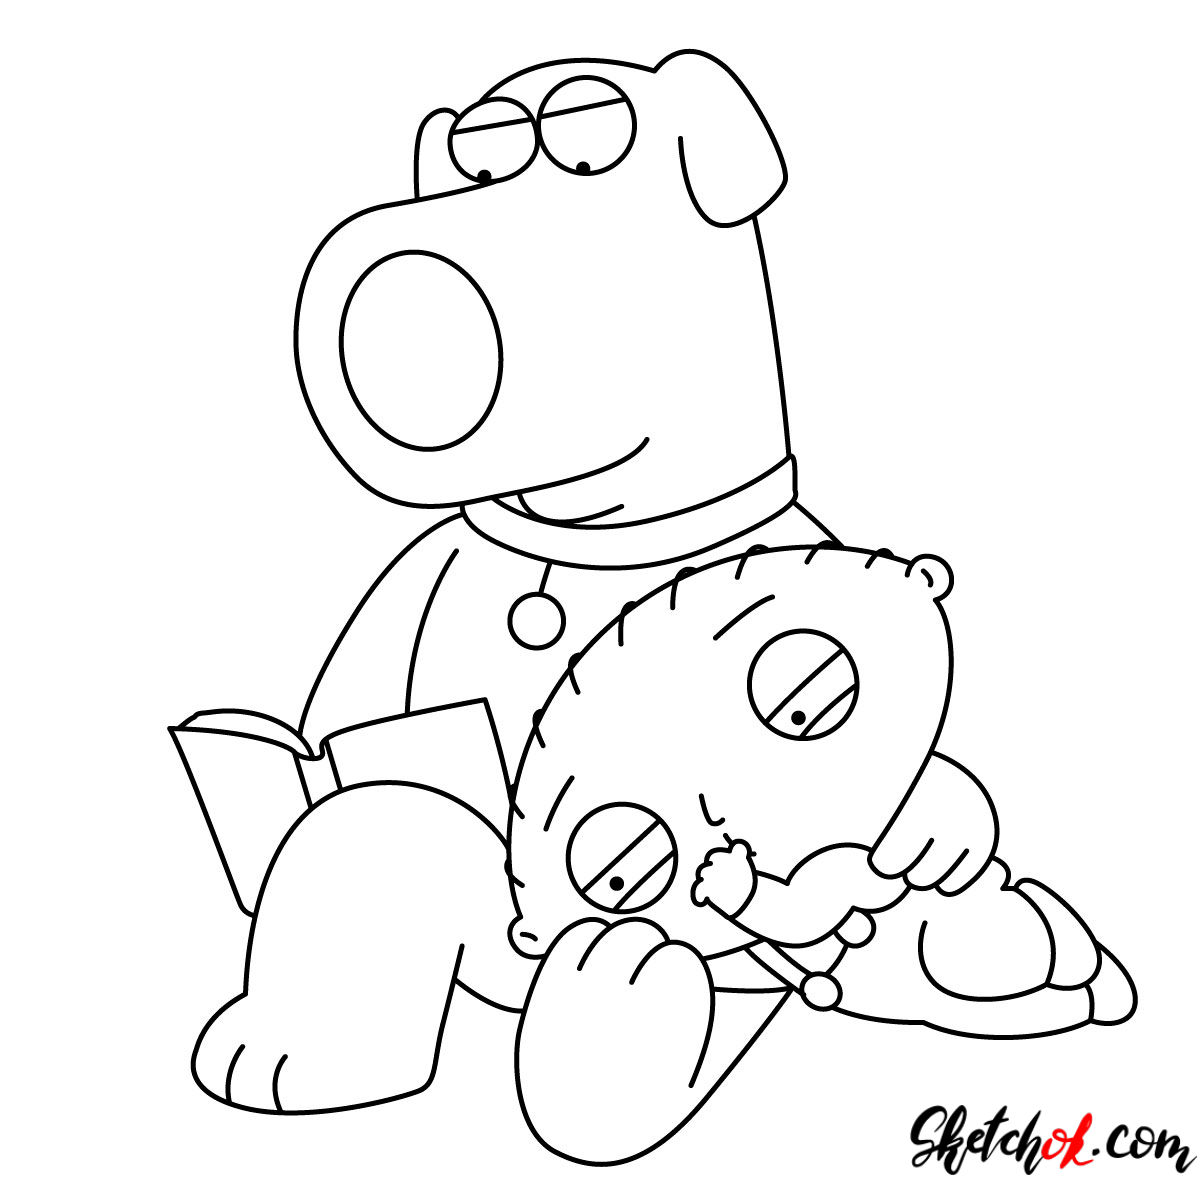 How to draw Stewie and Brian Griffin - step 11